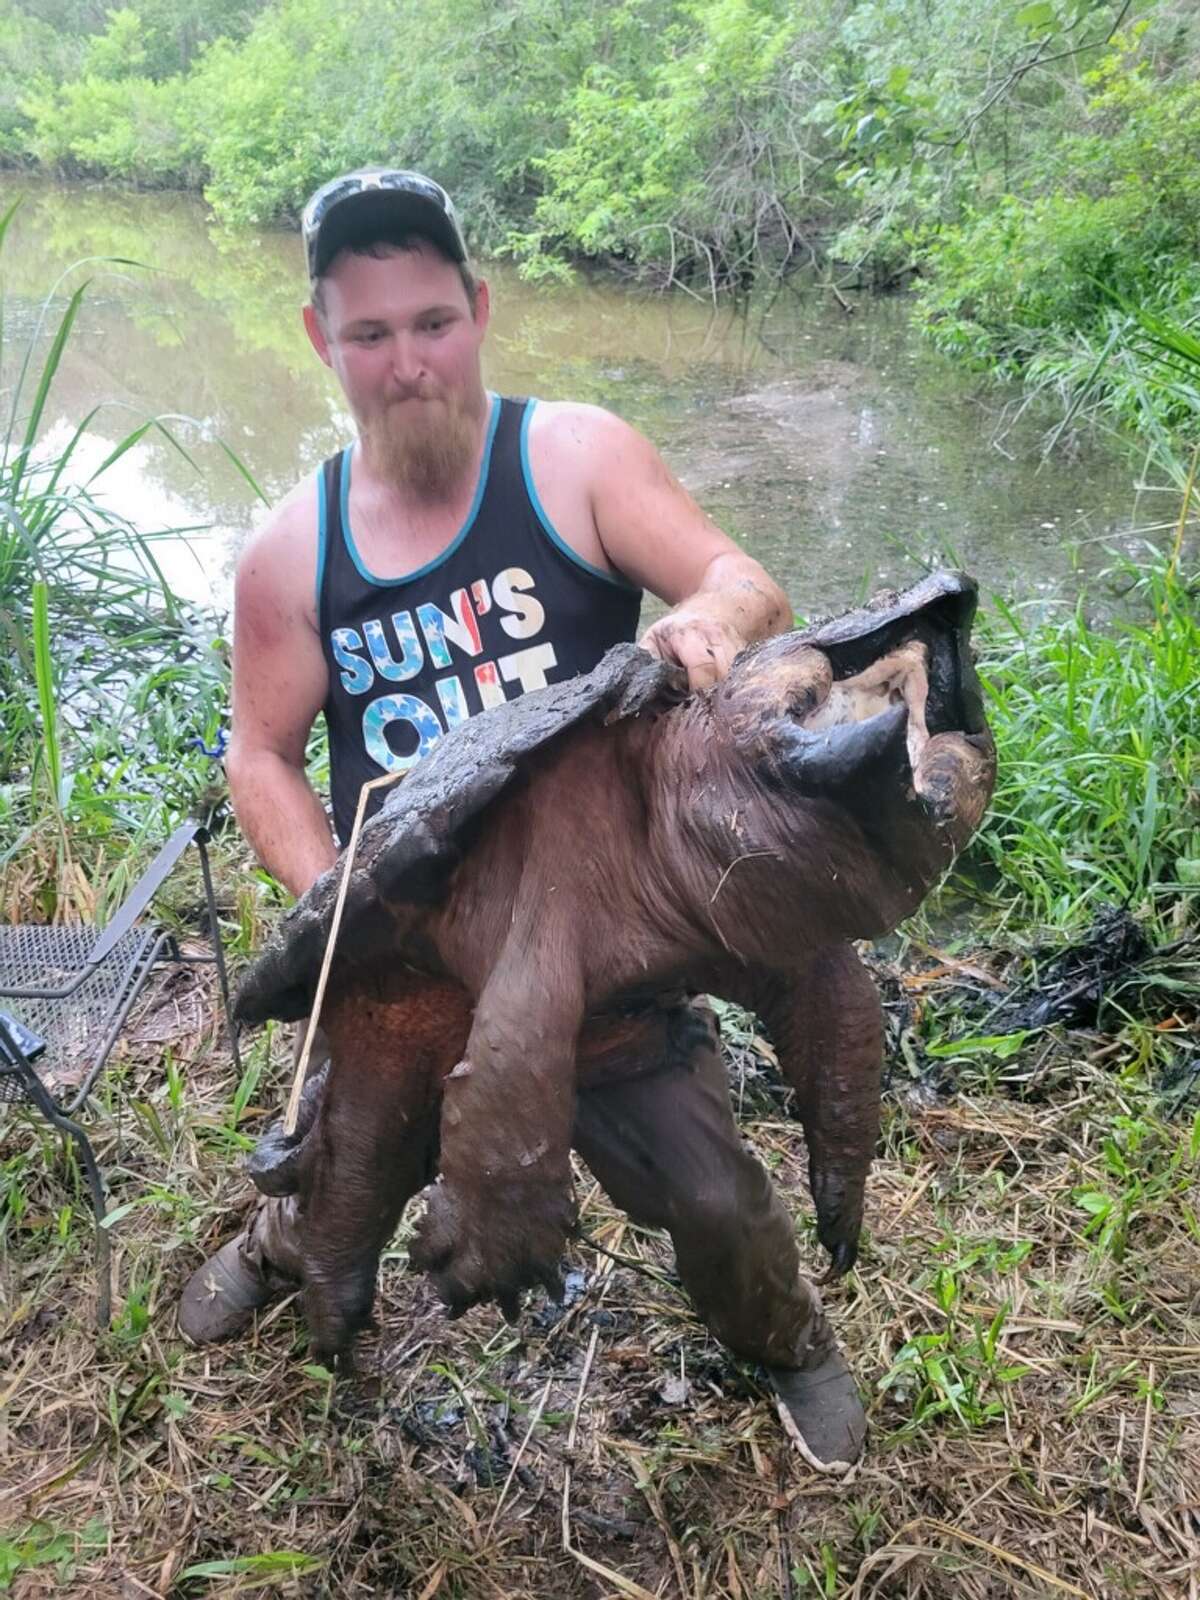  Justin Broomhall of Jefferson was fishing for catfish from the shores of Lake Cherokee when this alligator snapping turtle scooped up the glob of Catfish Charlie the angler was using for bait. Broomhall estimates the prehistoric looking turtle weighed around 150 pounds. Protected by state law, the turtle was released back into the lake. 